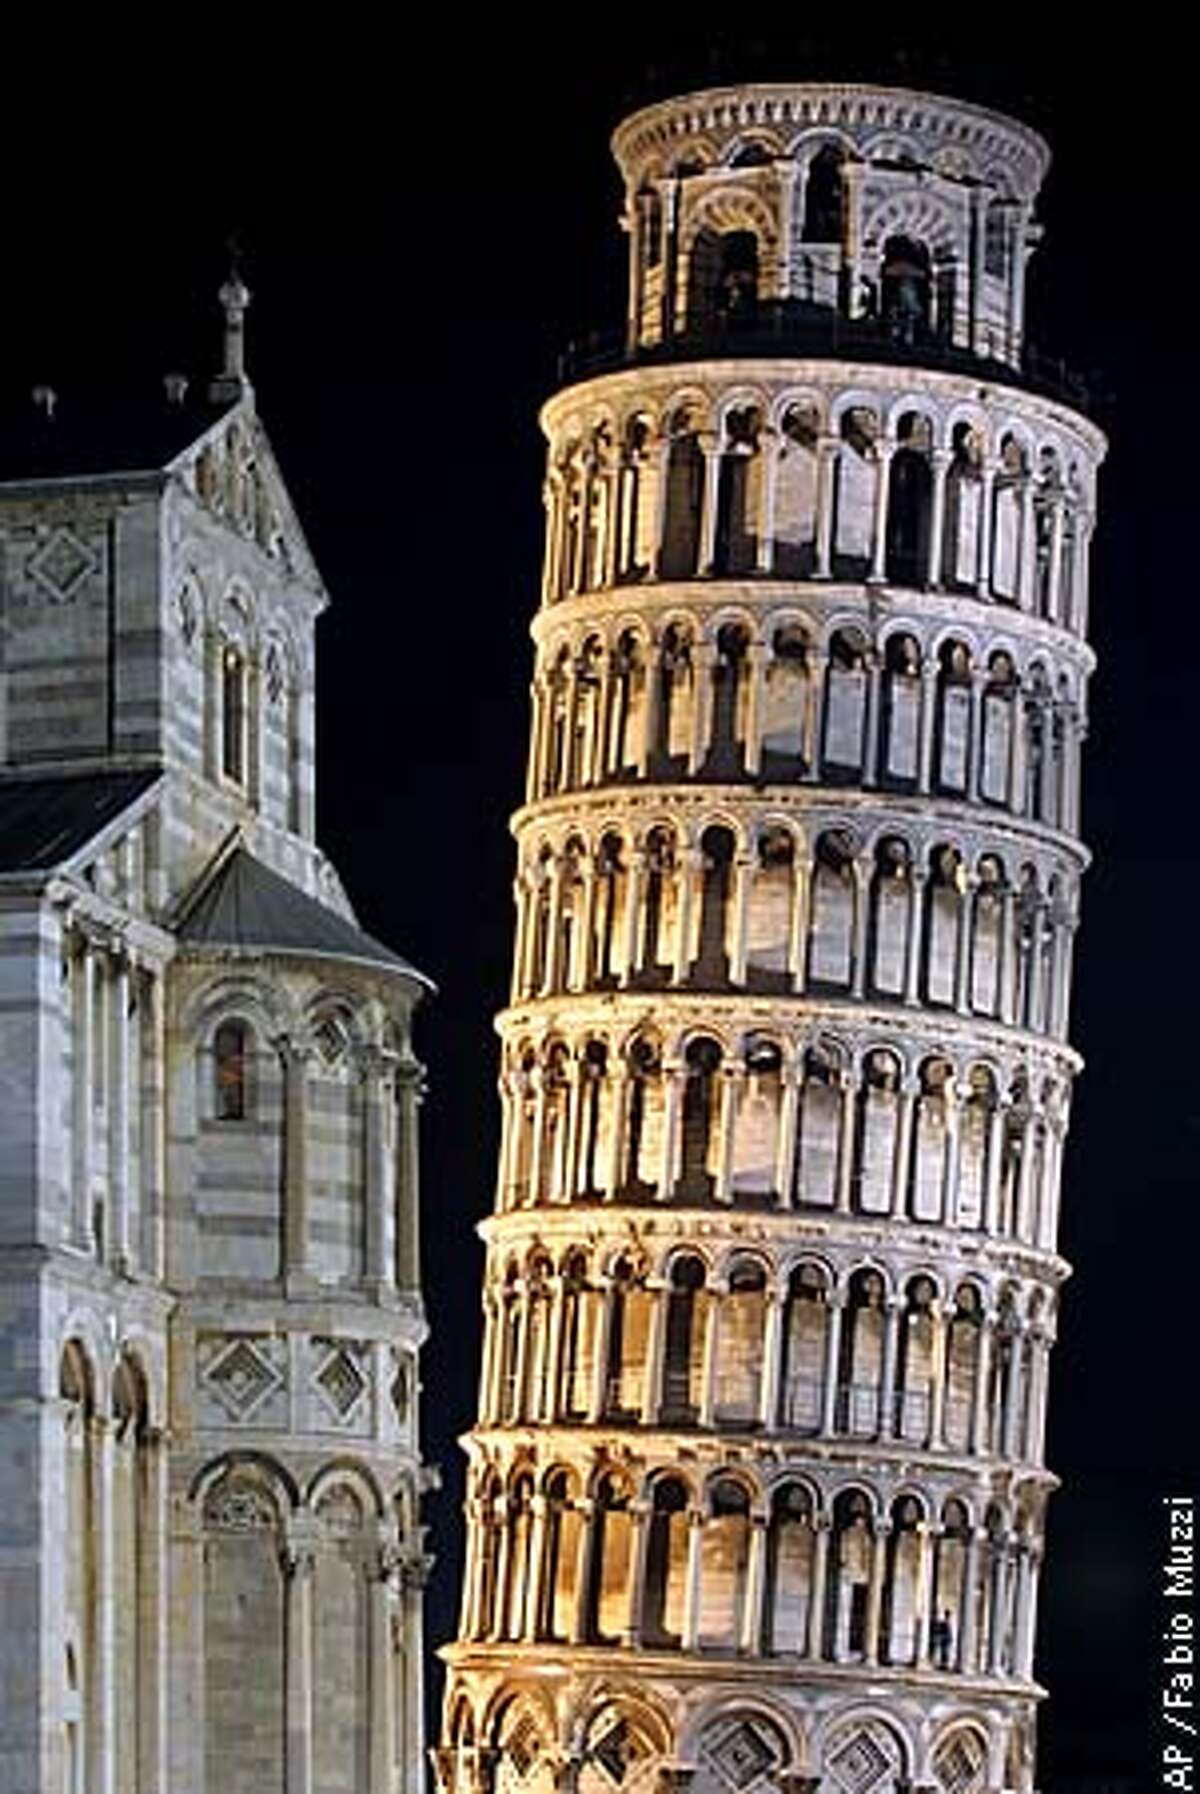 2001 italy reopens leaning tower of pizza